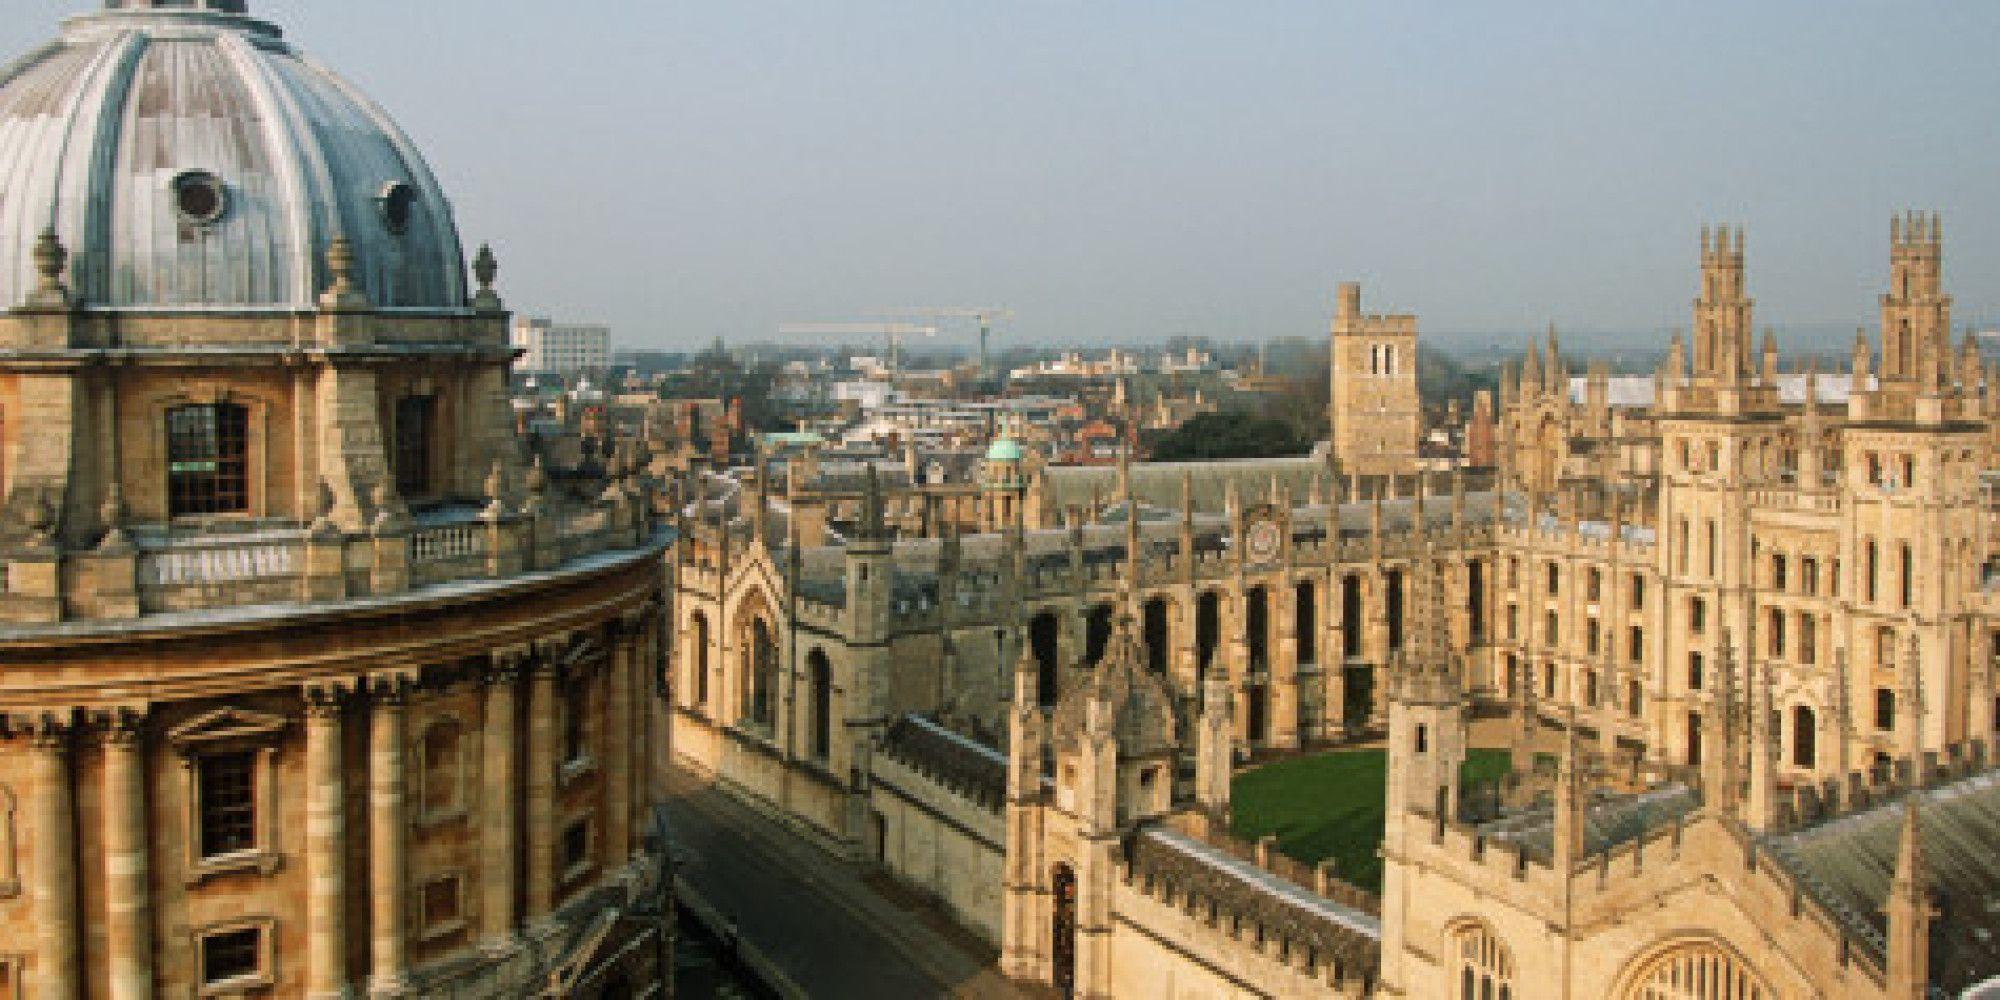 Oxford HD Wallpaper, For Free Download. Adorable Wallpaper